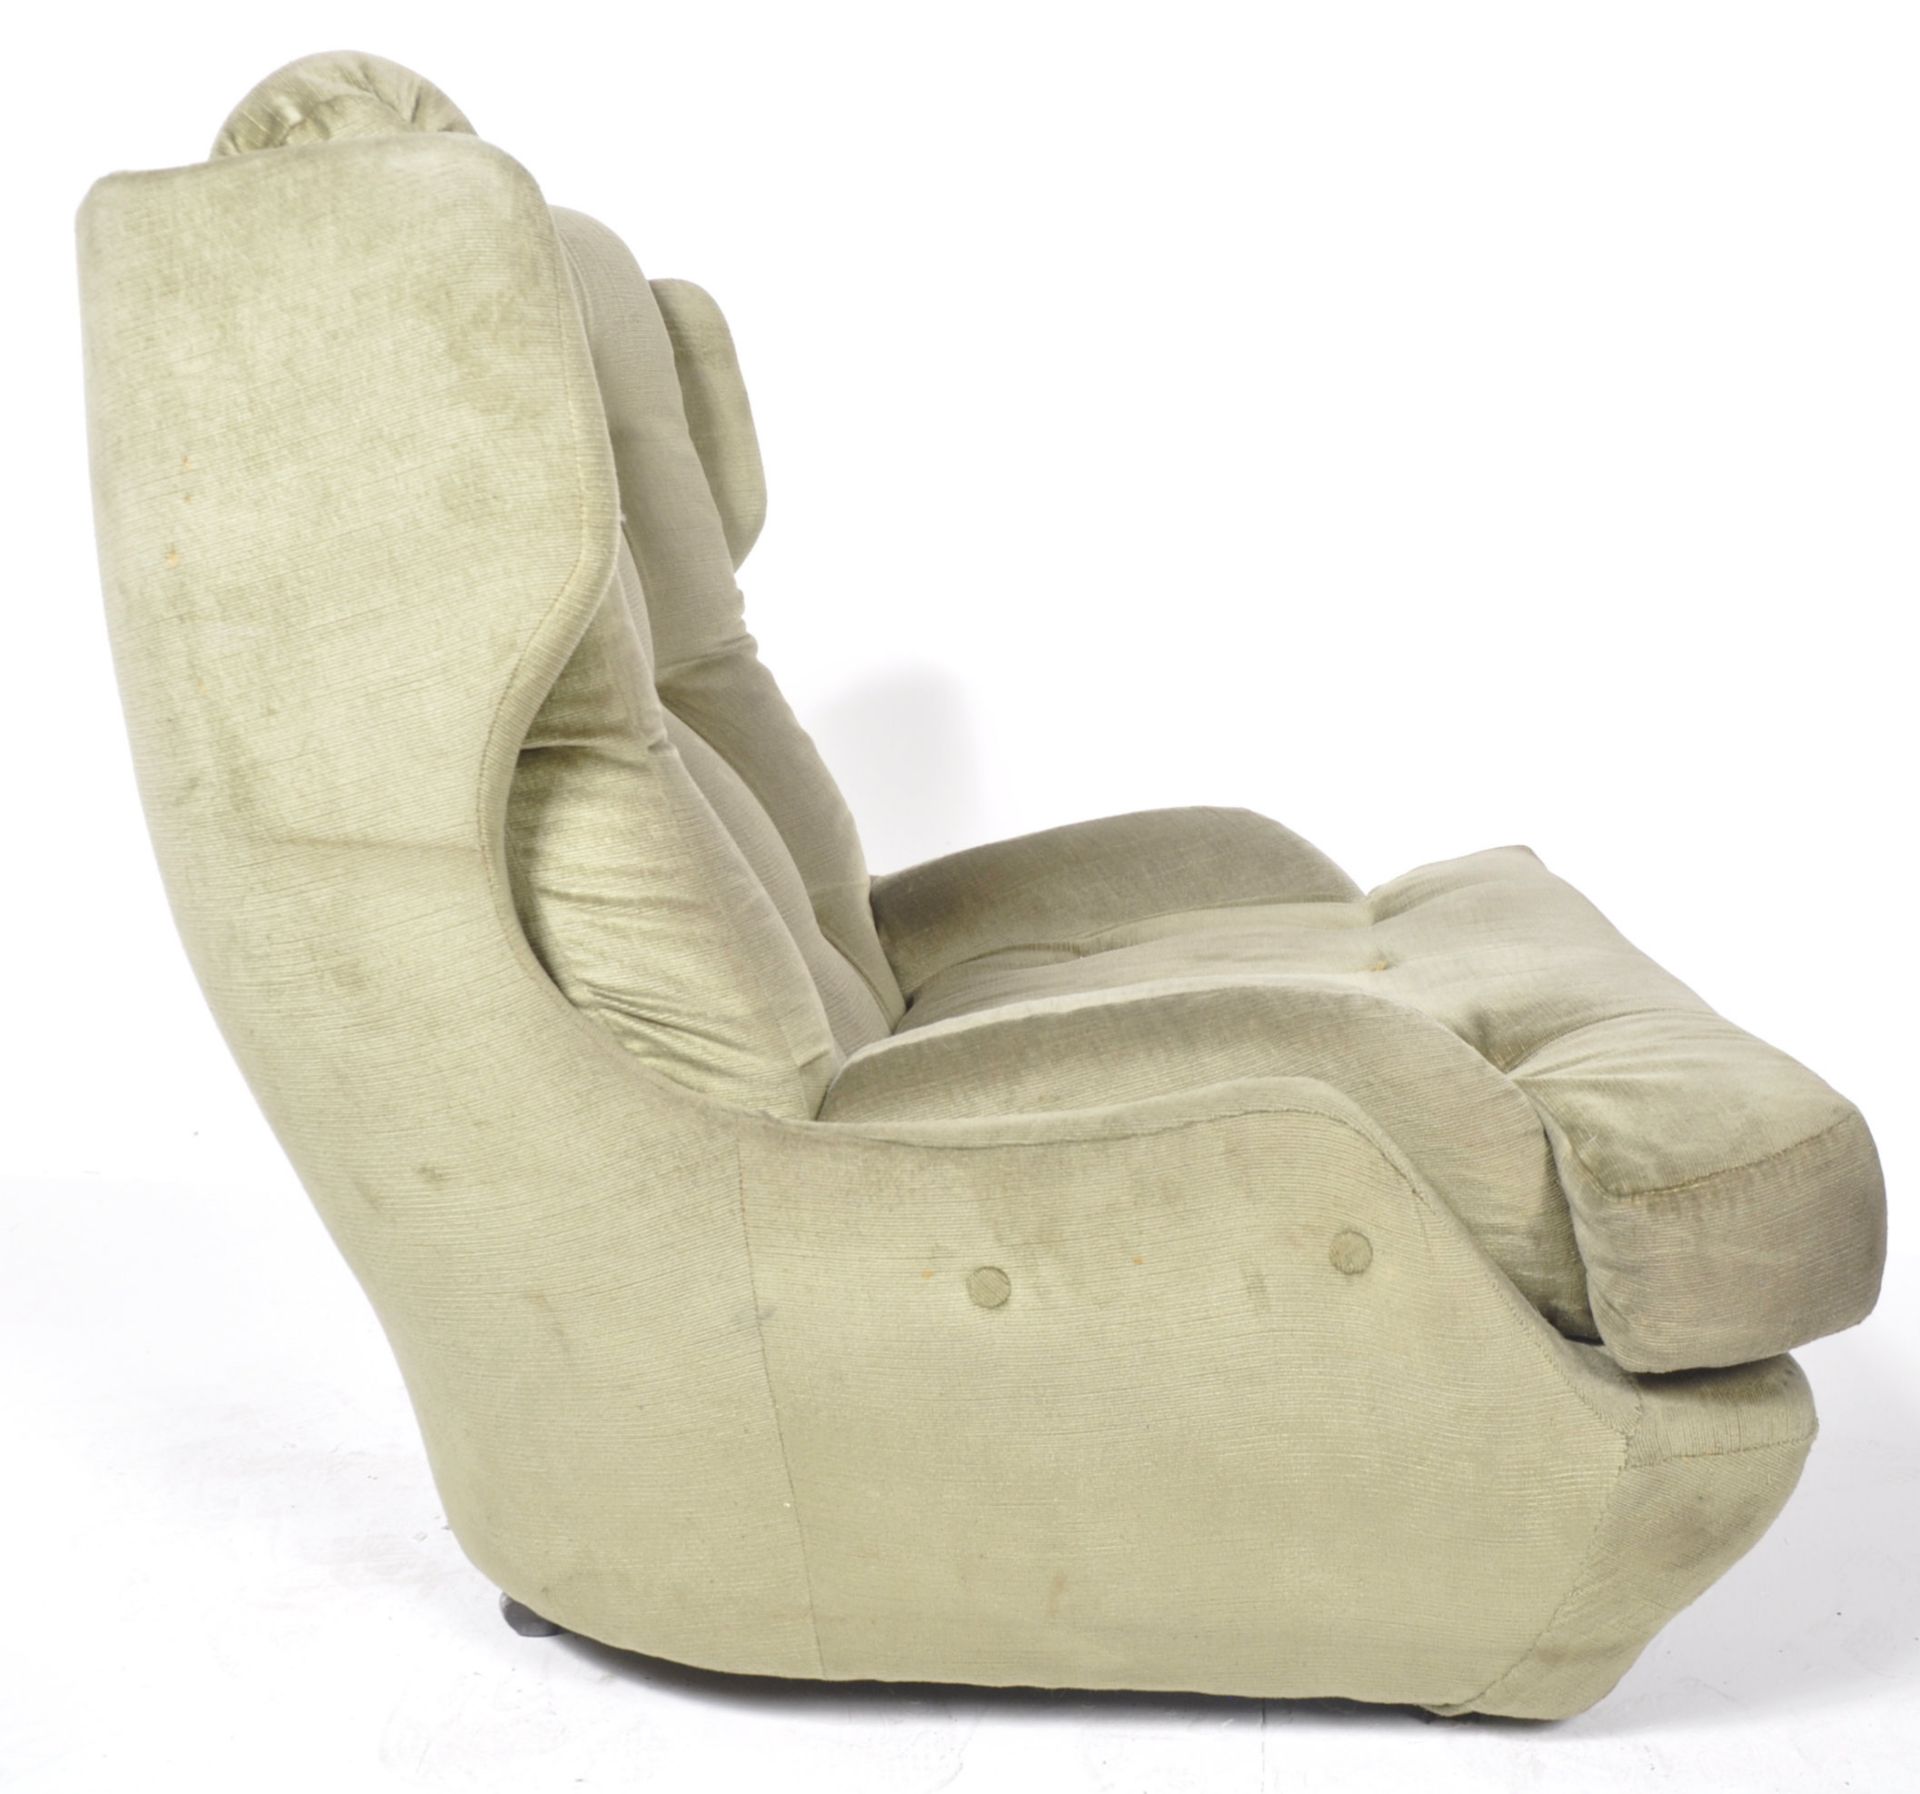 RETRO VINTAGE 1960S EASY LOUNGE EGG CHAIR - Image 5 of 9